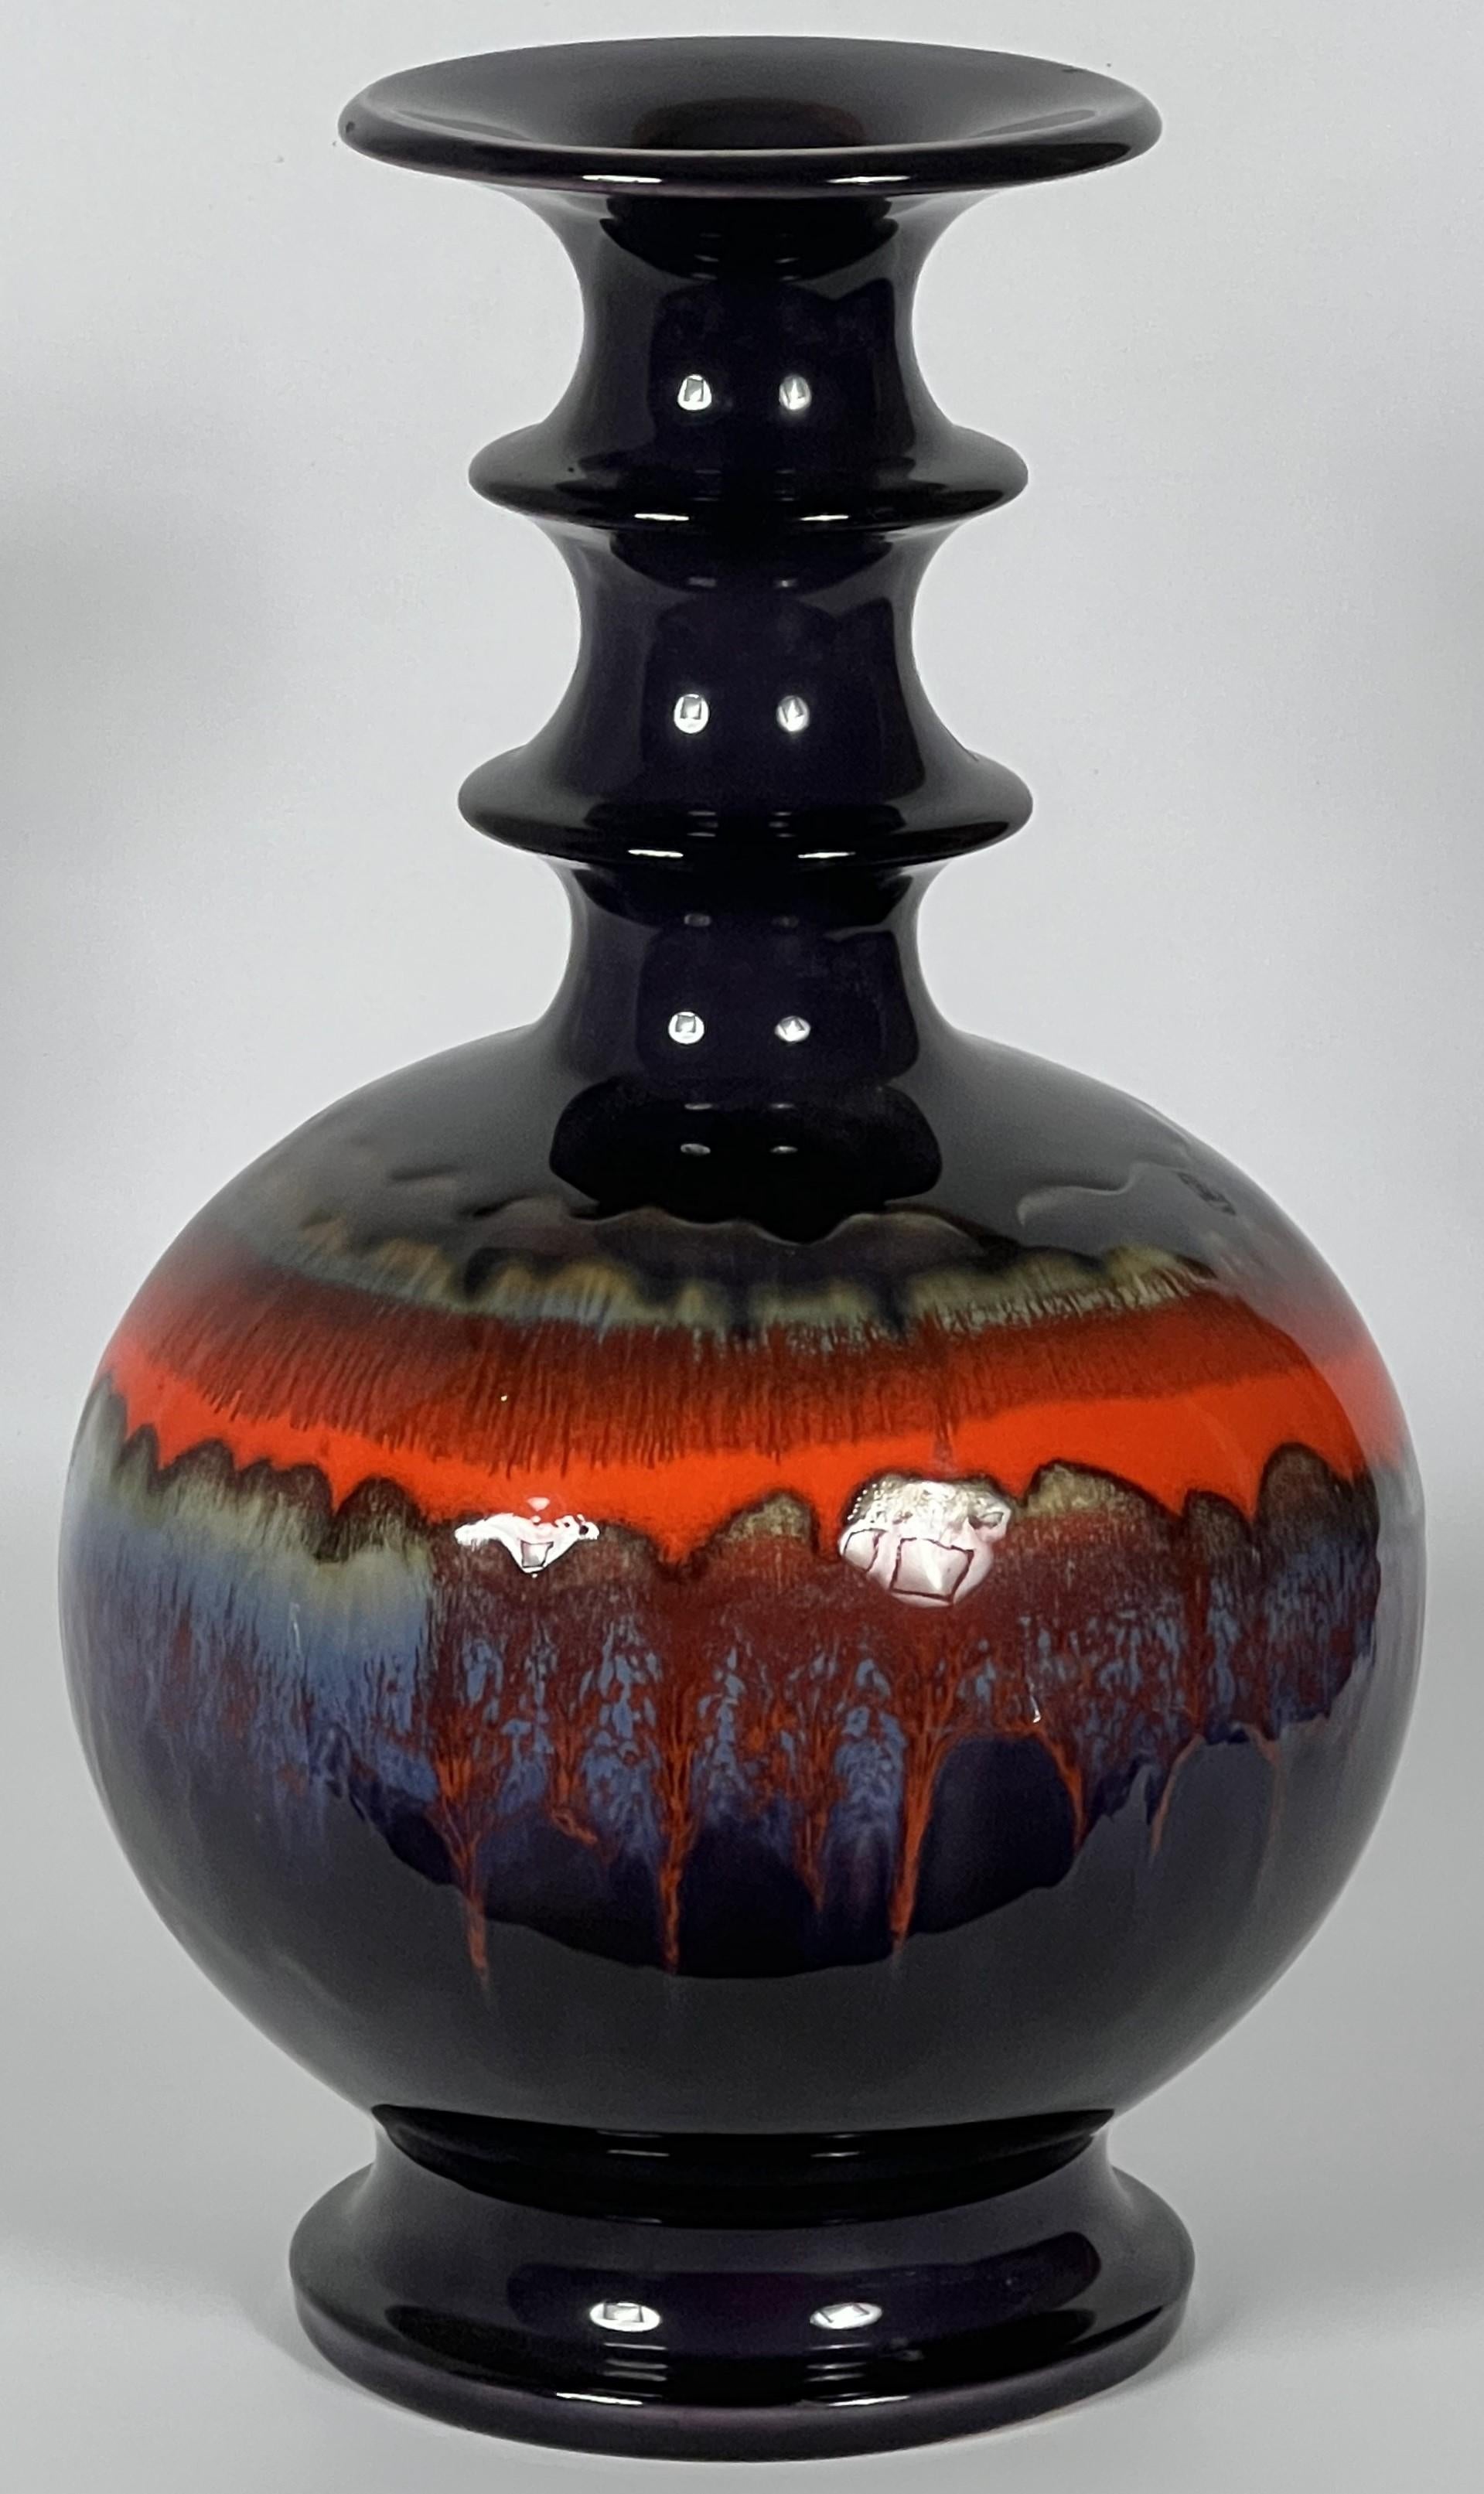 Renee Neue's designs at Hutschenreuther are some of the most vibrant space age ceramics produced. This vase is absolutely atomic as the repeating bands along the neck appear to erupt from the surface of a sun as if a nuclear explosion has disturbed